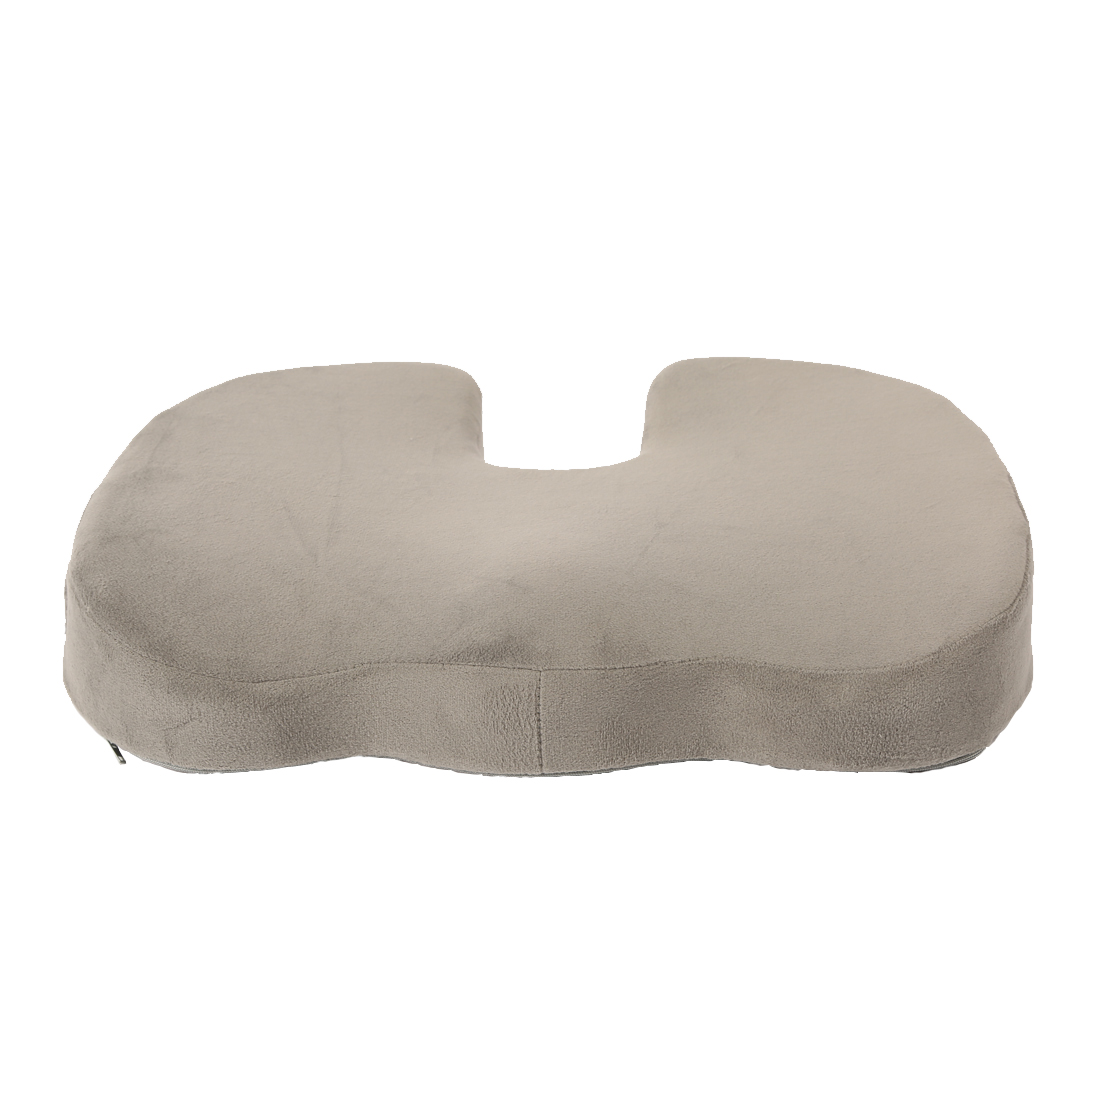 Memory Foam Seat Chair Cushion for Relieves Back Sciatica Pain Tailbone  Pain Coccyx Degenerating Disc Orthopedic Osteoarthritis Prostate Cushion  Low